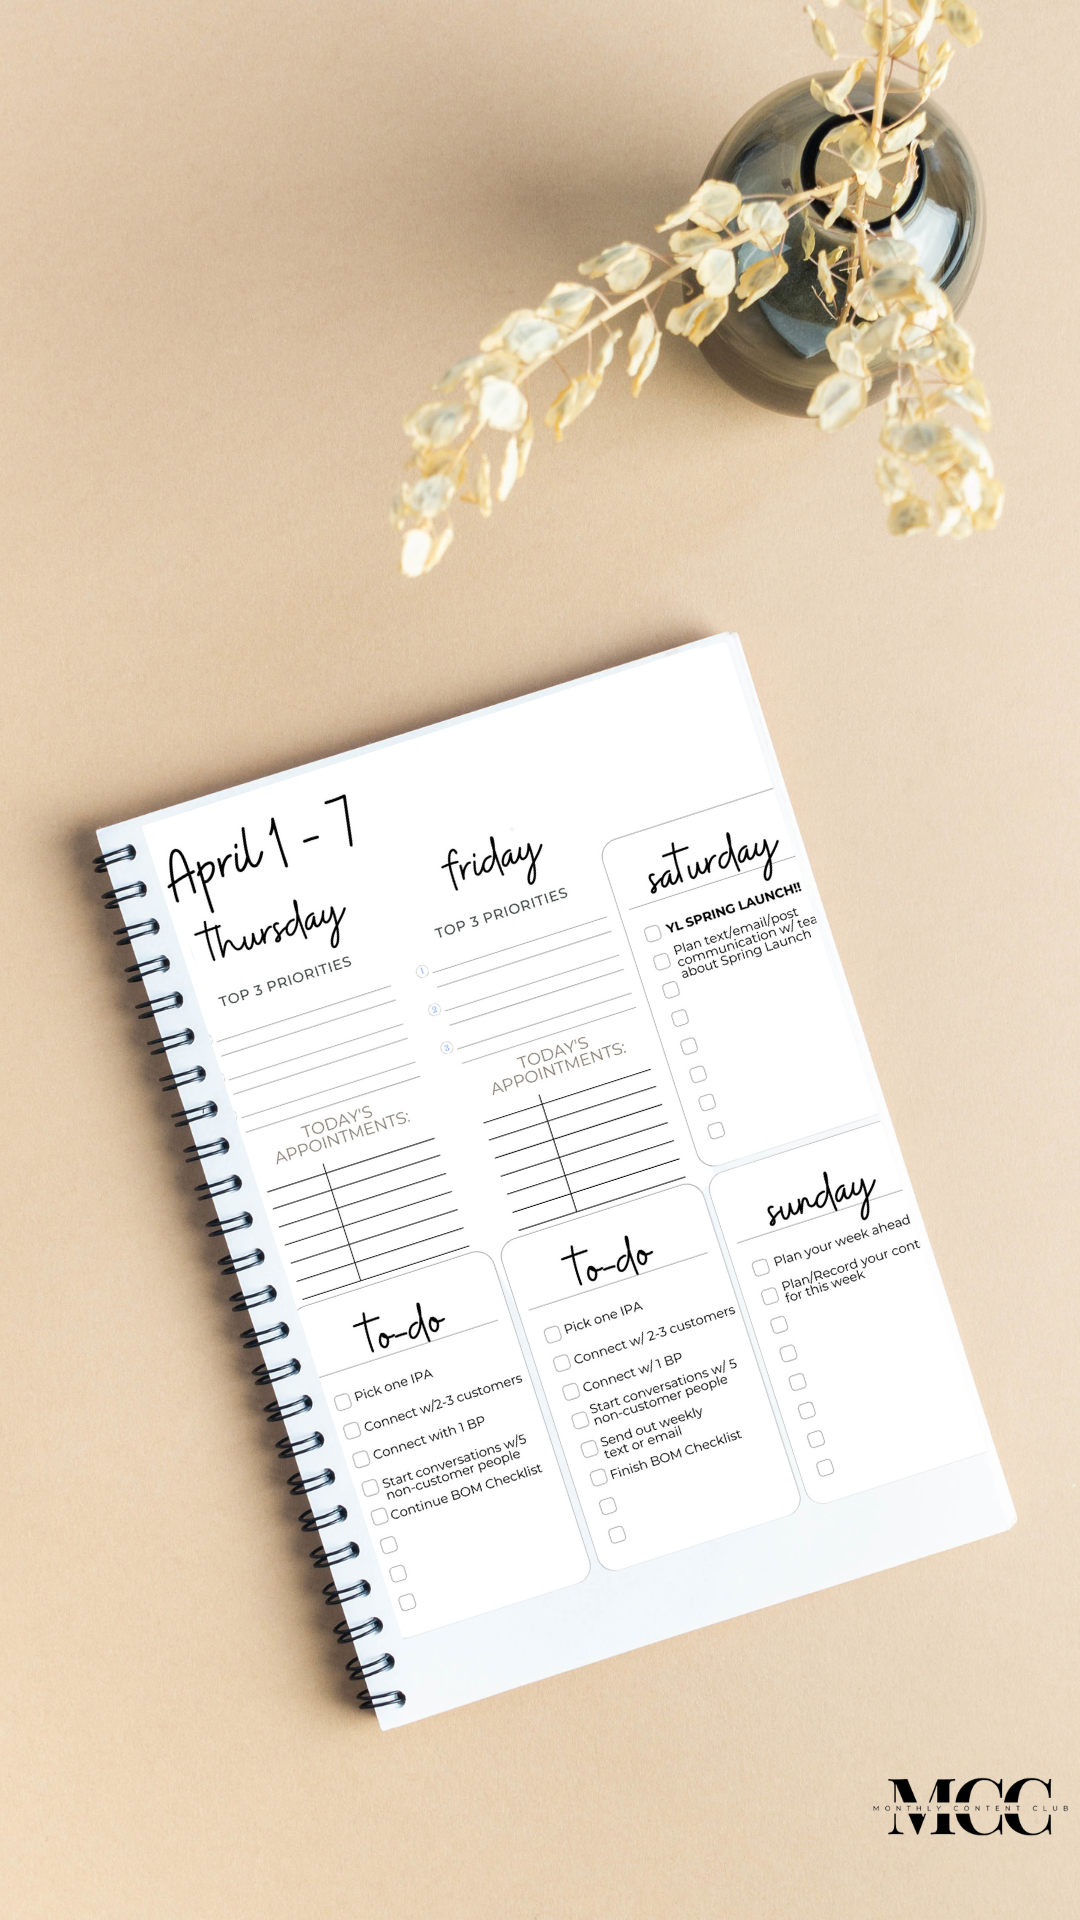 The Monthly Content Planner - 33% off!